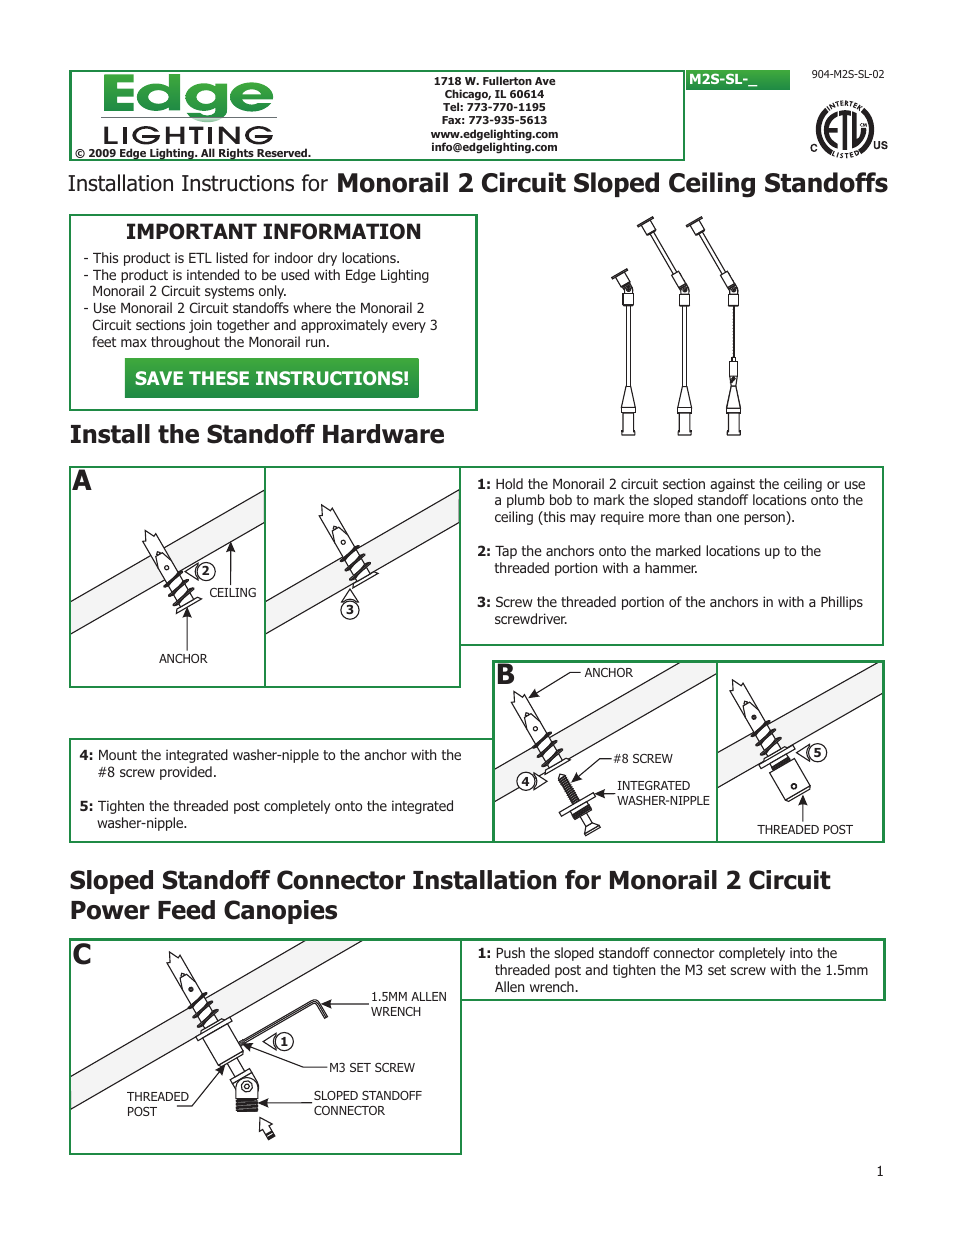 2 Circuit Standoffs - Sloped Ceiling